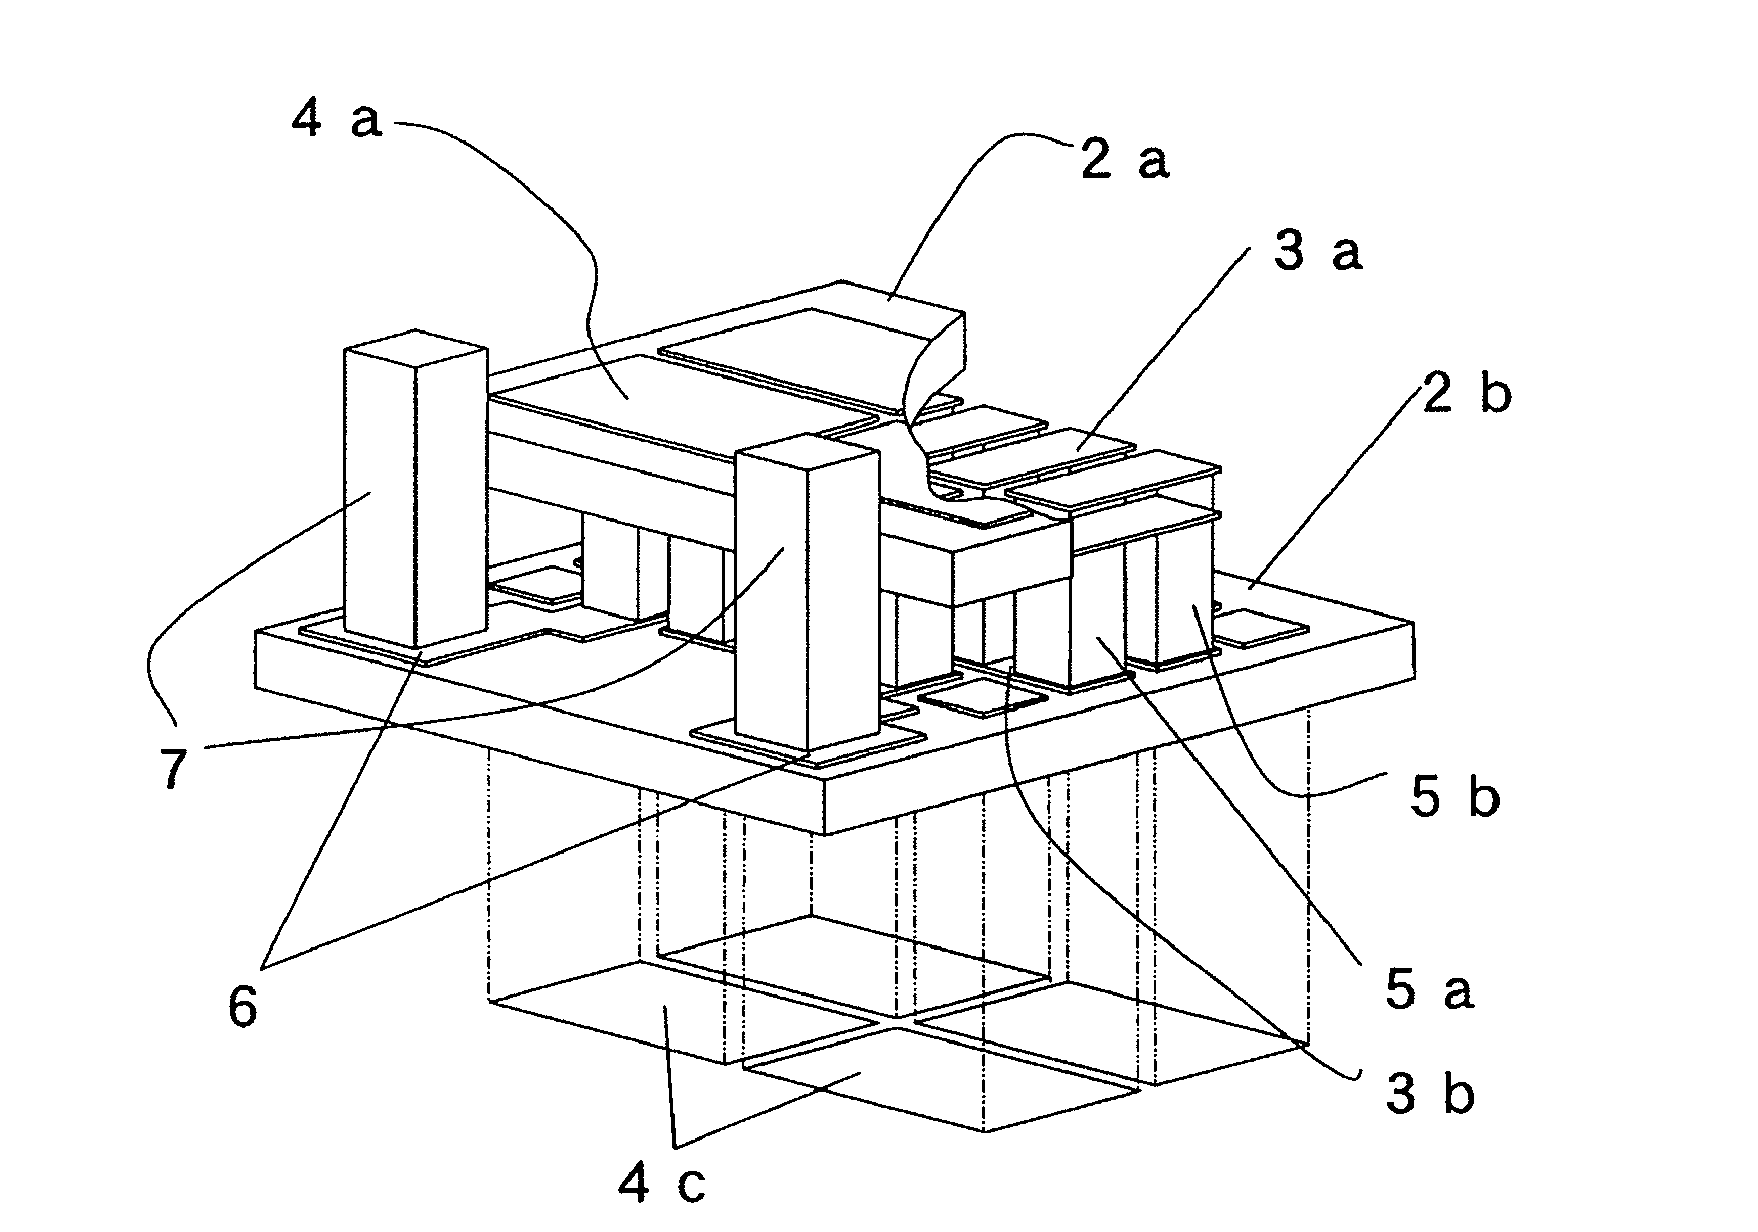 Thermoelectric module and metallized substrate